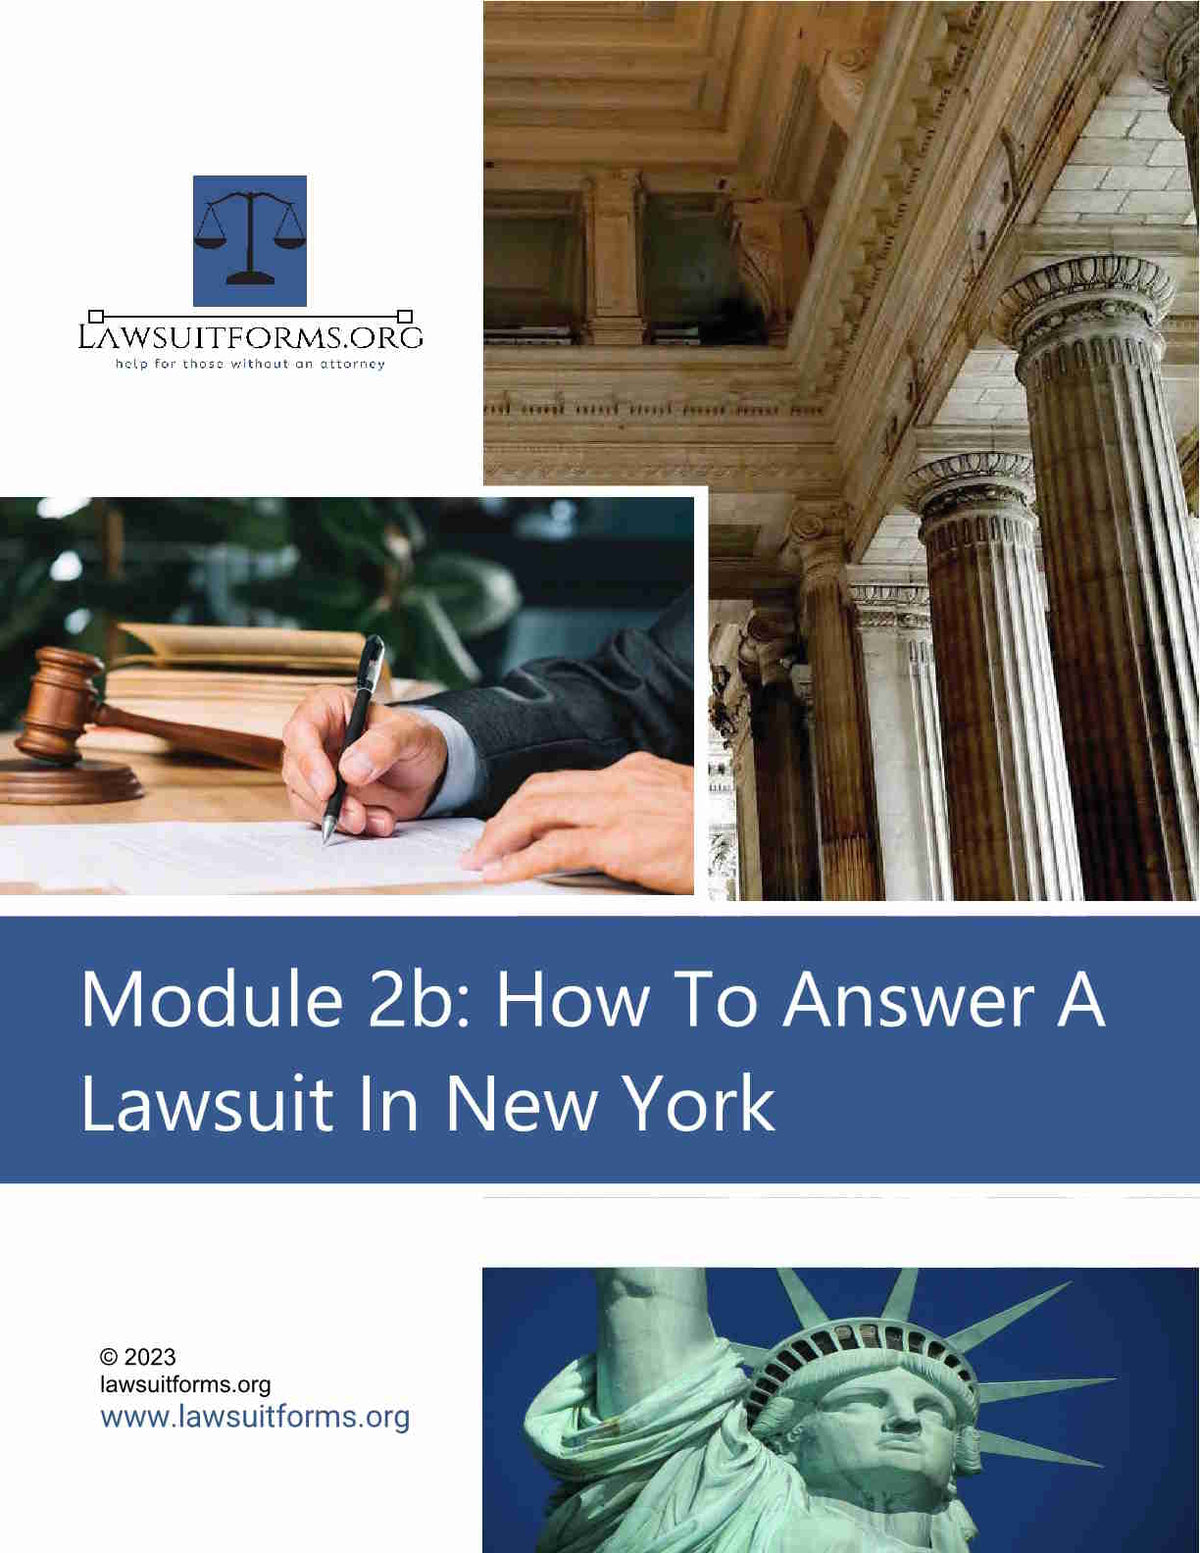 How to answer a lawsuit in New York